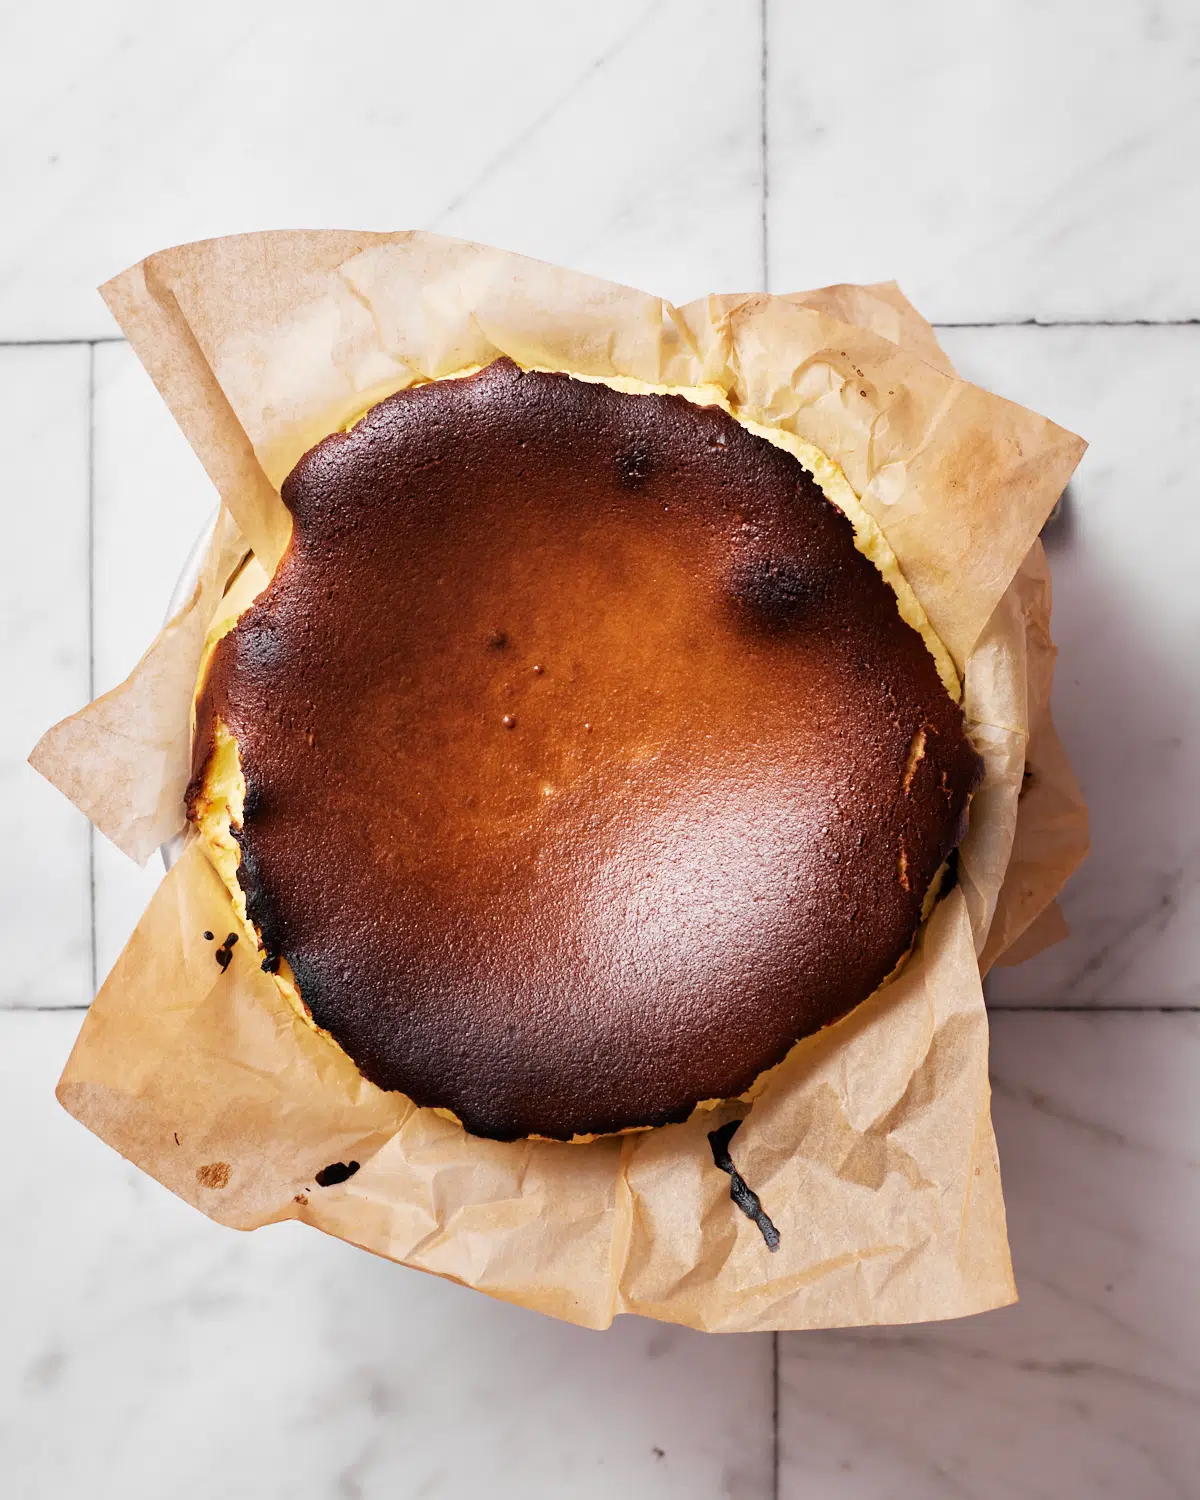 Caramelized top of a burnt basque cheesecake.